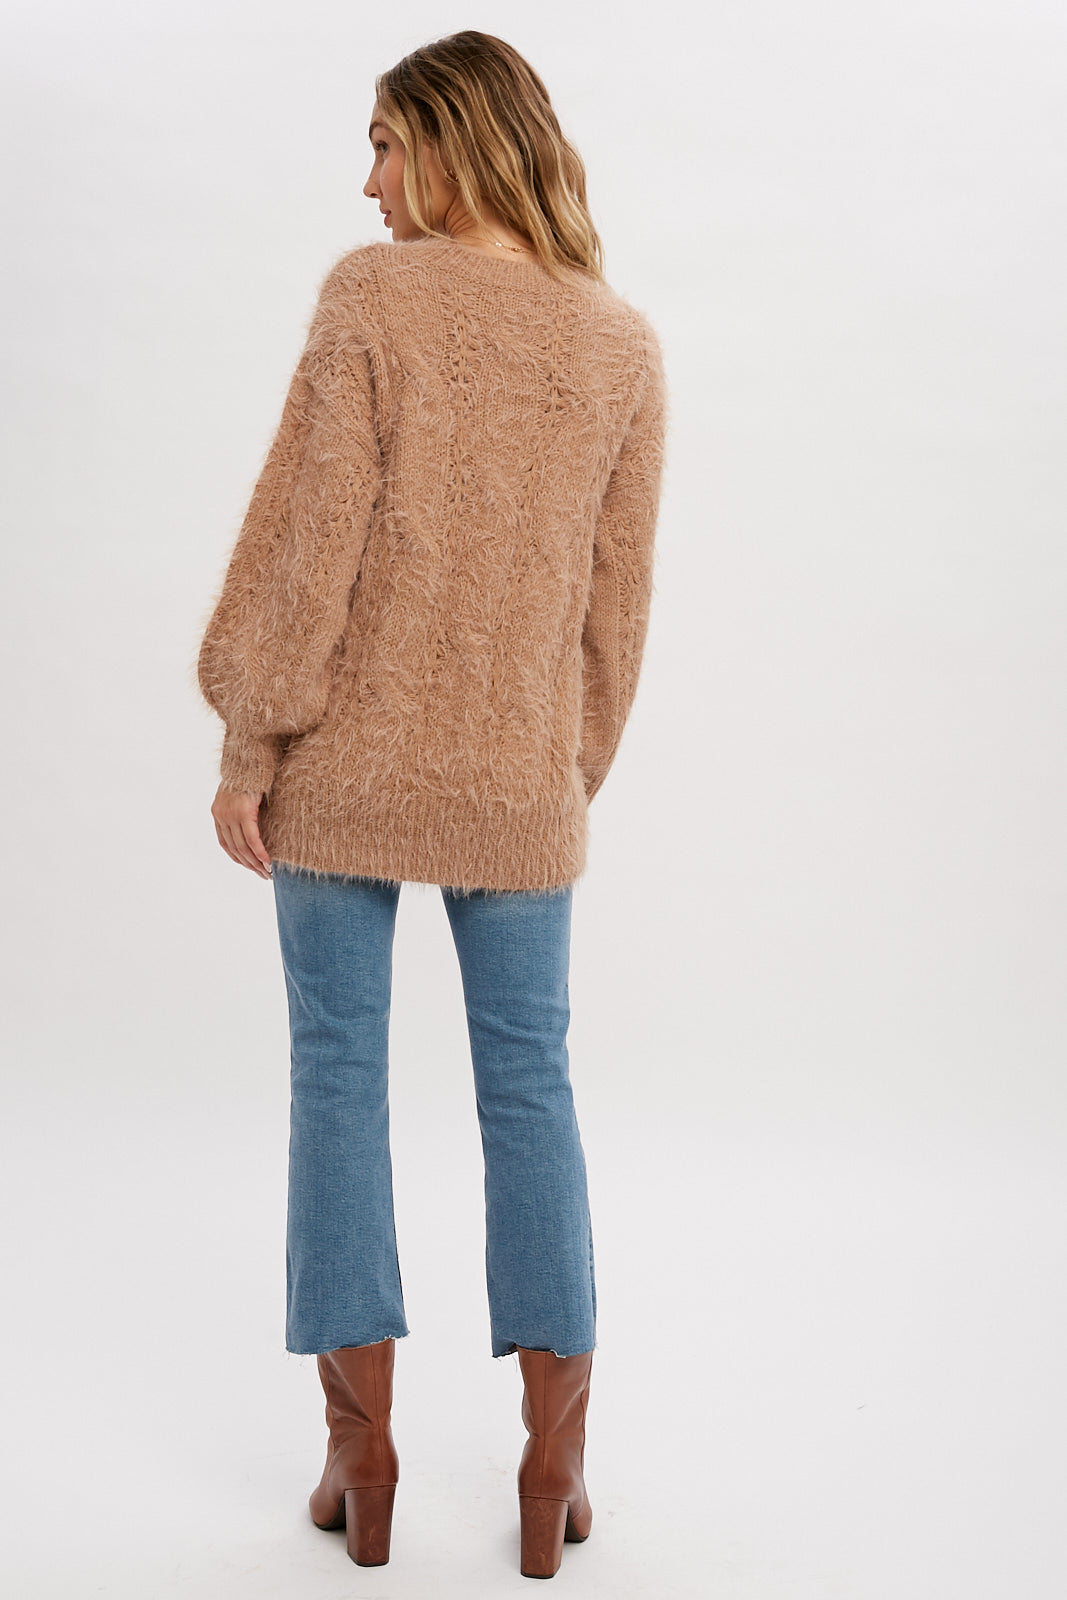 Tunic Style Fuzzy Sweater in Latte